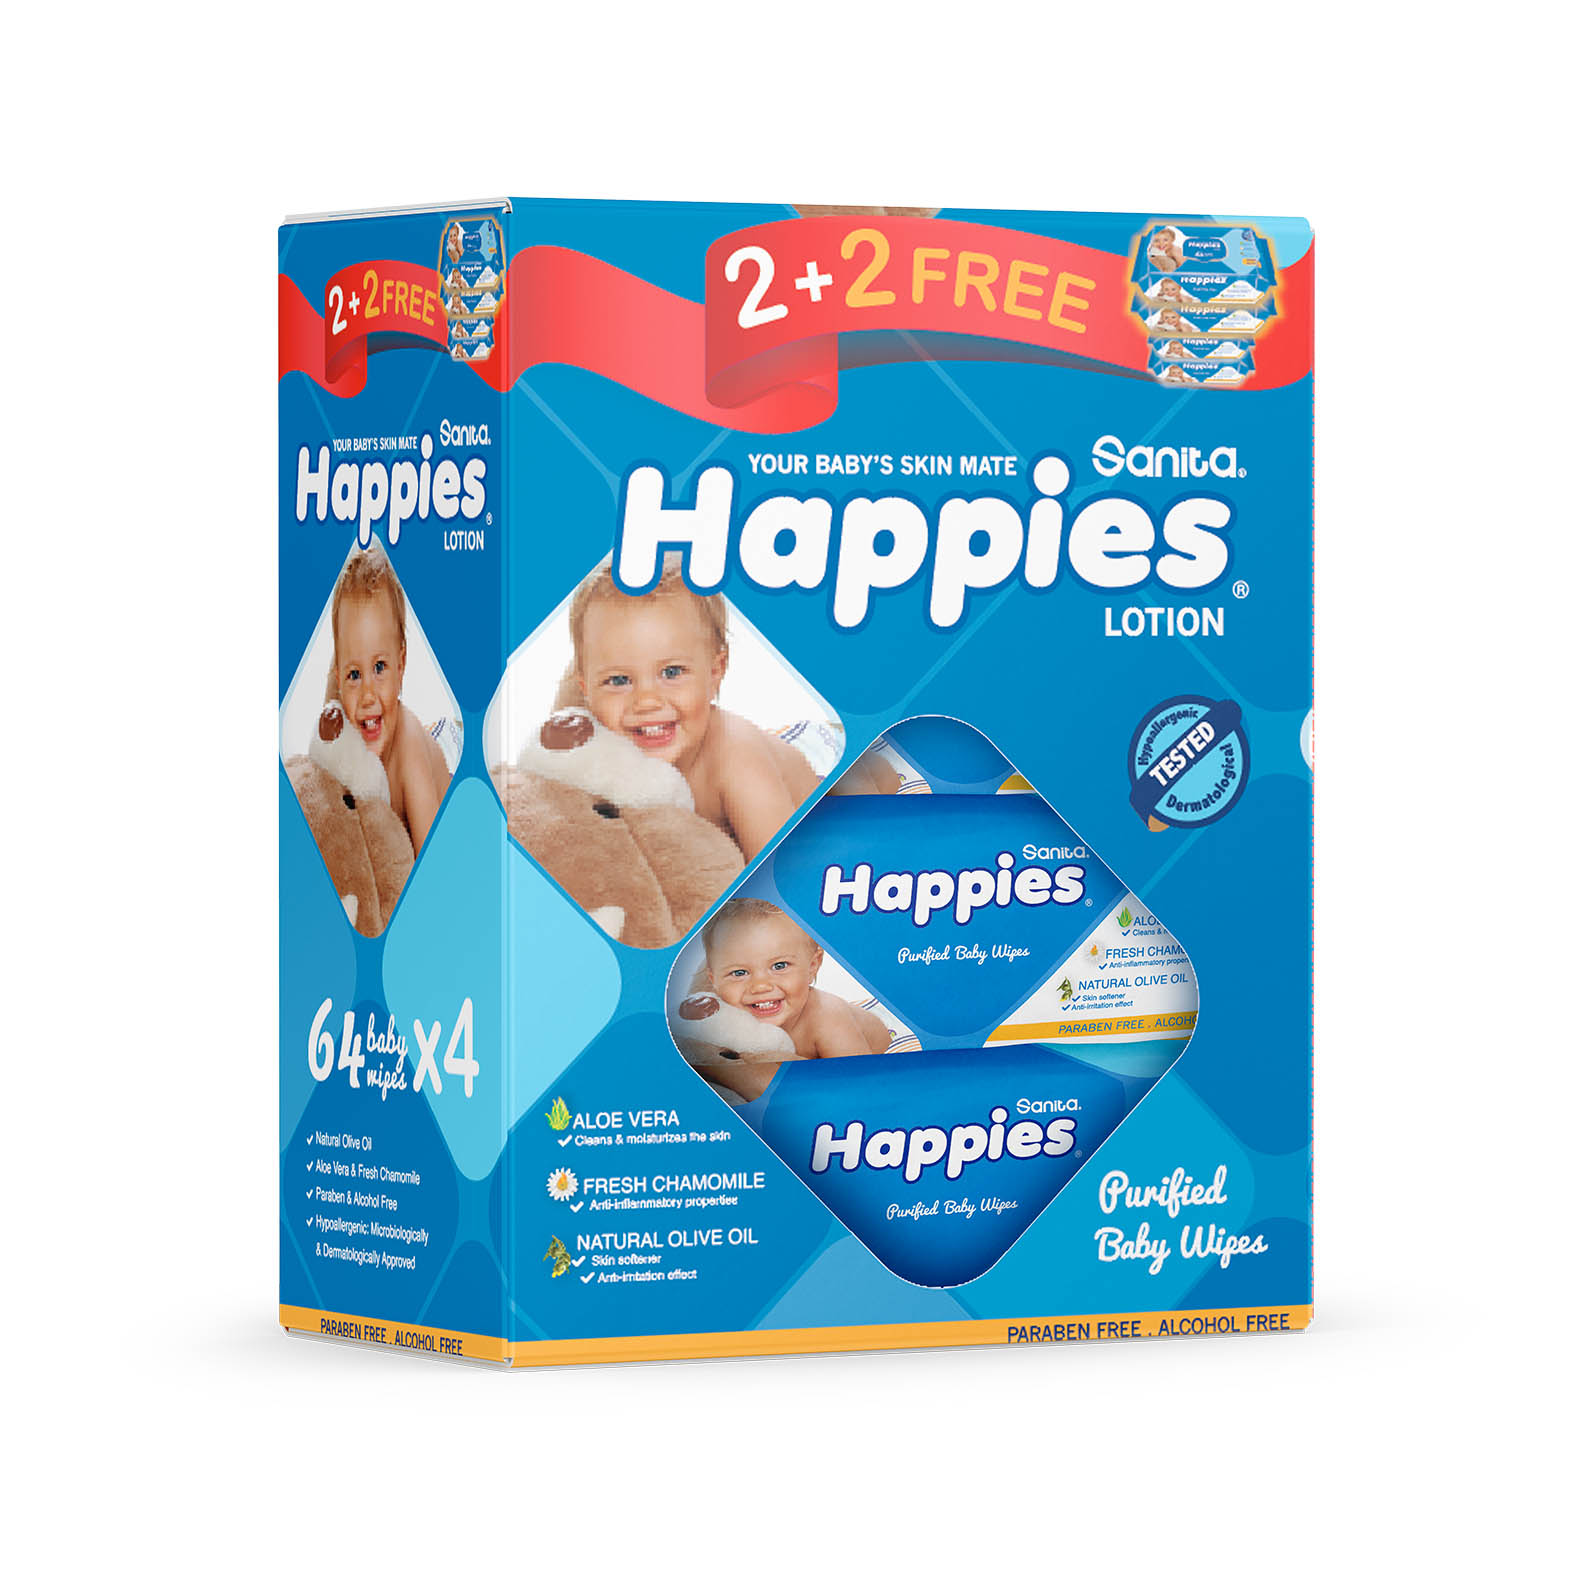 Happies Lebanon - Sweet dreams, sleep tight and have a very good night! 🌙☁  This is how your child's night will be with Happies! 12 hours of dryness  guaranteed #Happies #Diapers #Baby #